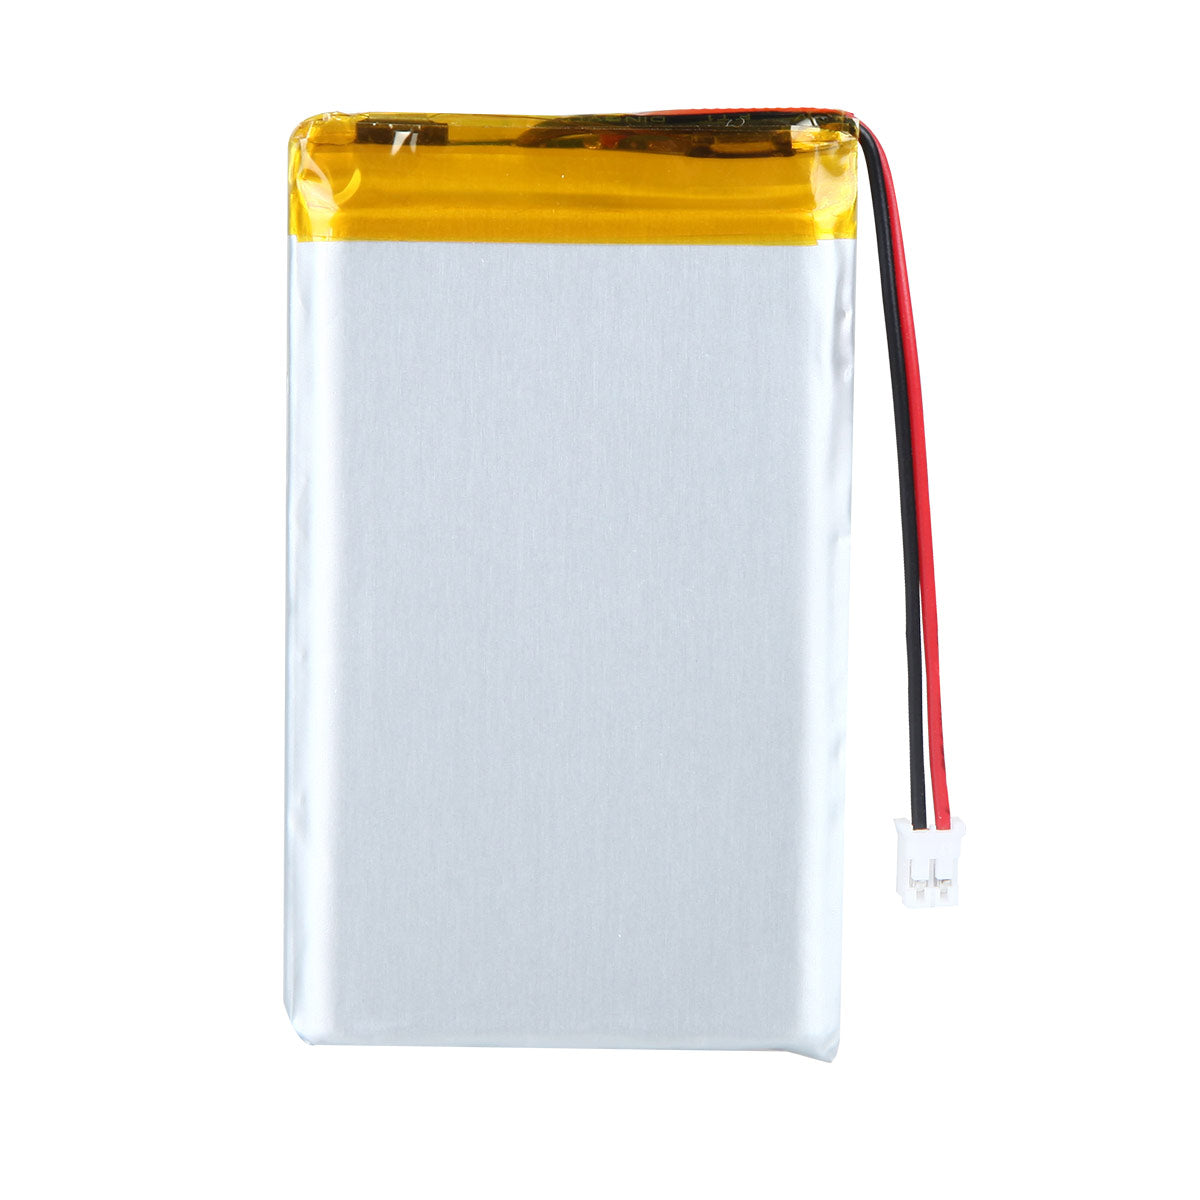 YDL 3.7V 1600mAh 754067 Rechargeable Lithium Polymer Battery